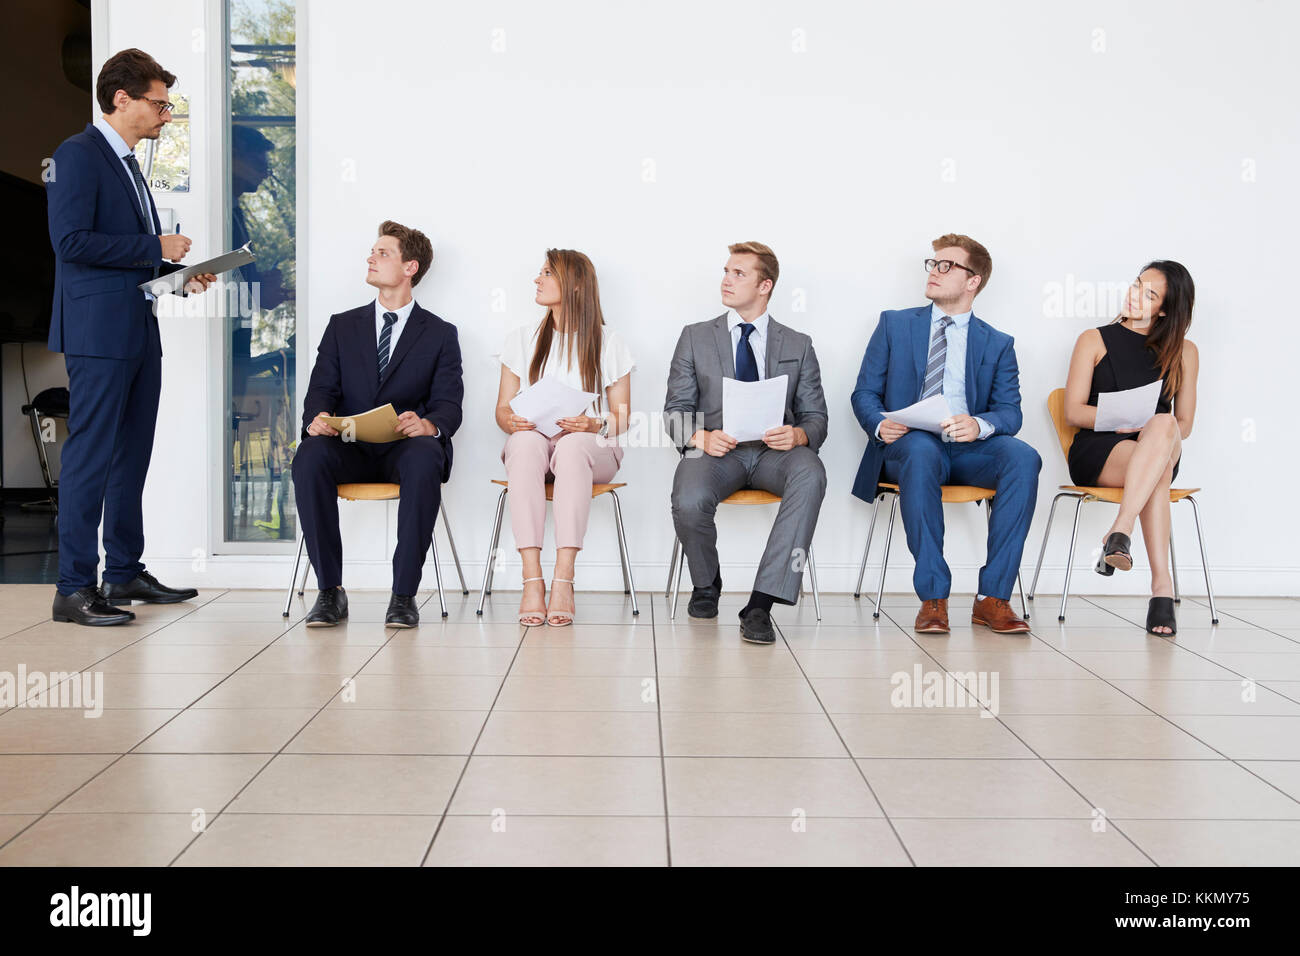 Recruiter and people waiting for job interviews, full length Stock Photo